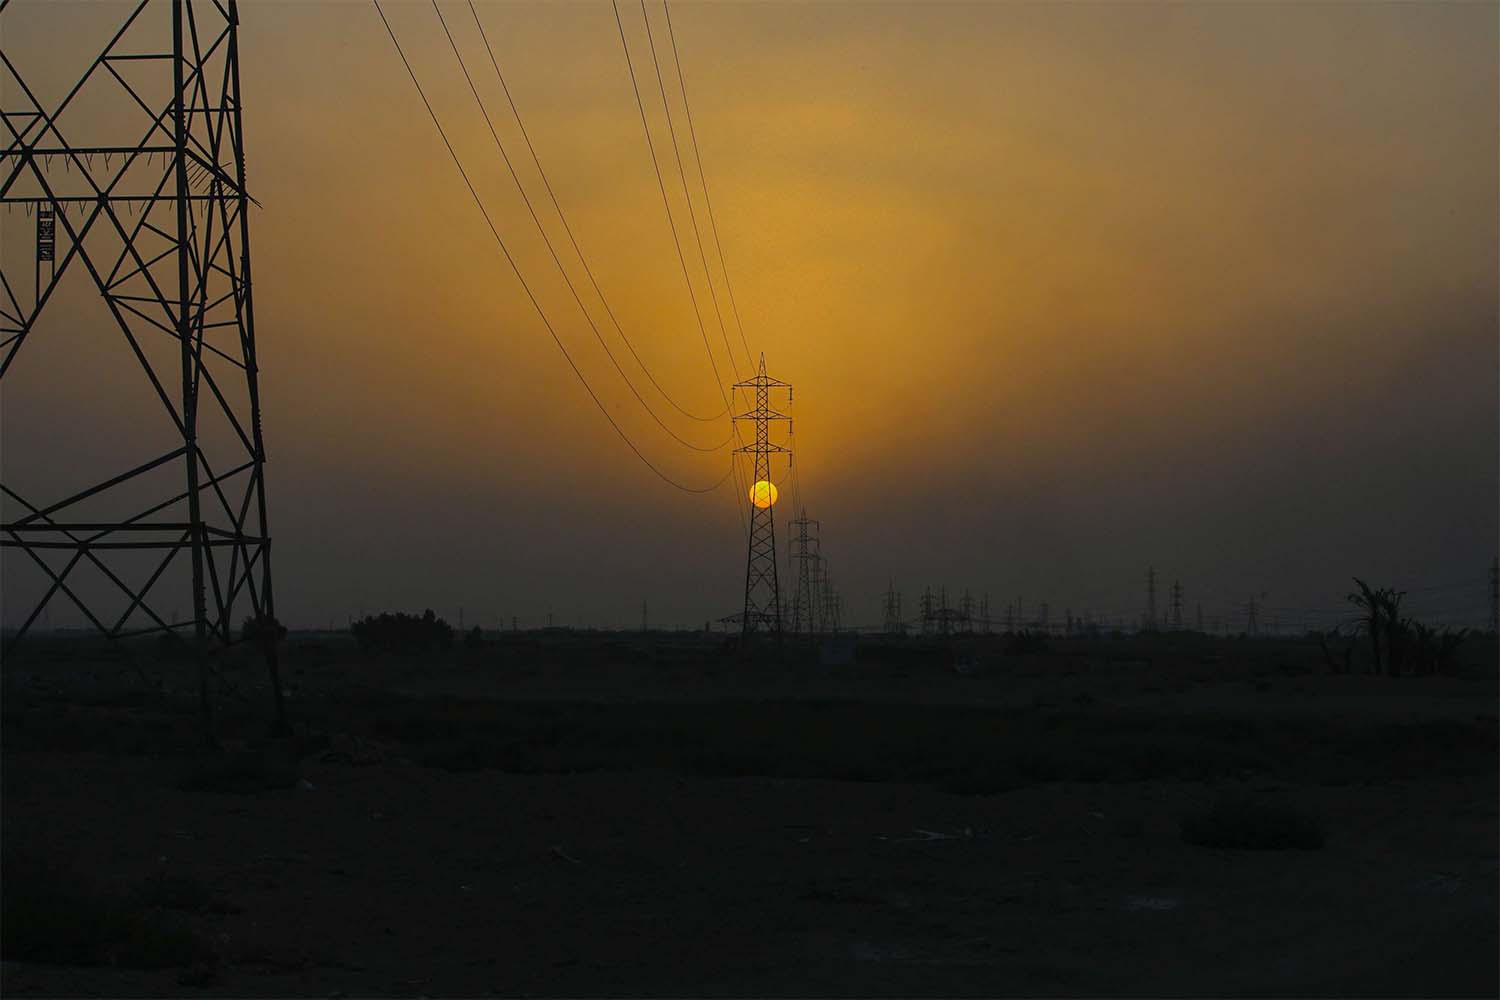 Iraq hopes the agreement would help mitigate its energy supply gap